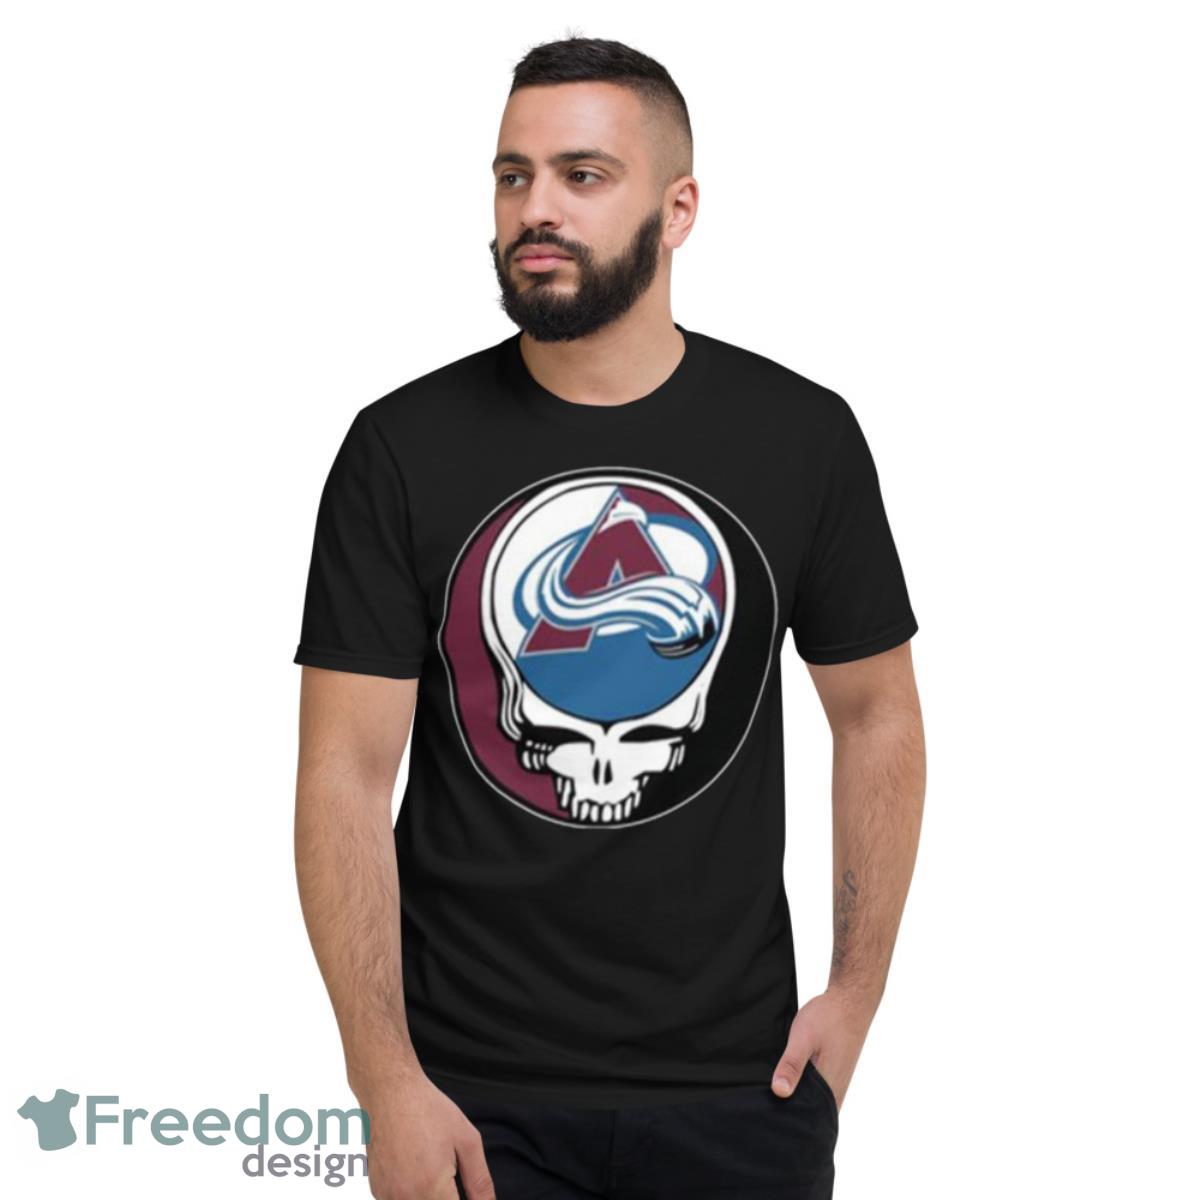 Colorado Avalanche on X: A team-signed Grateful Dead jersey would